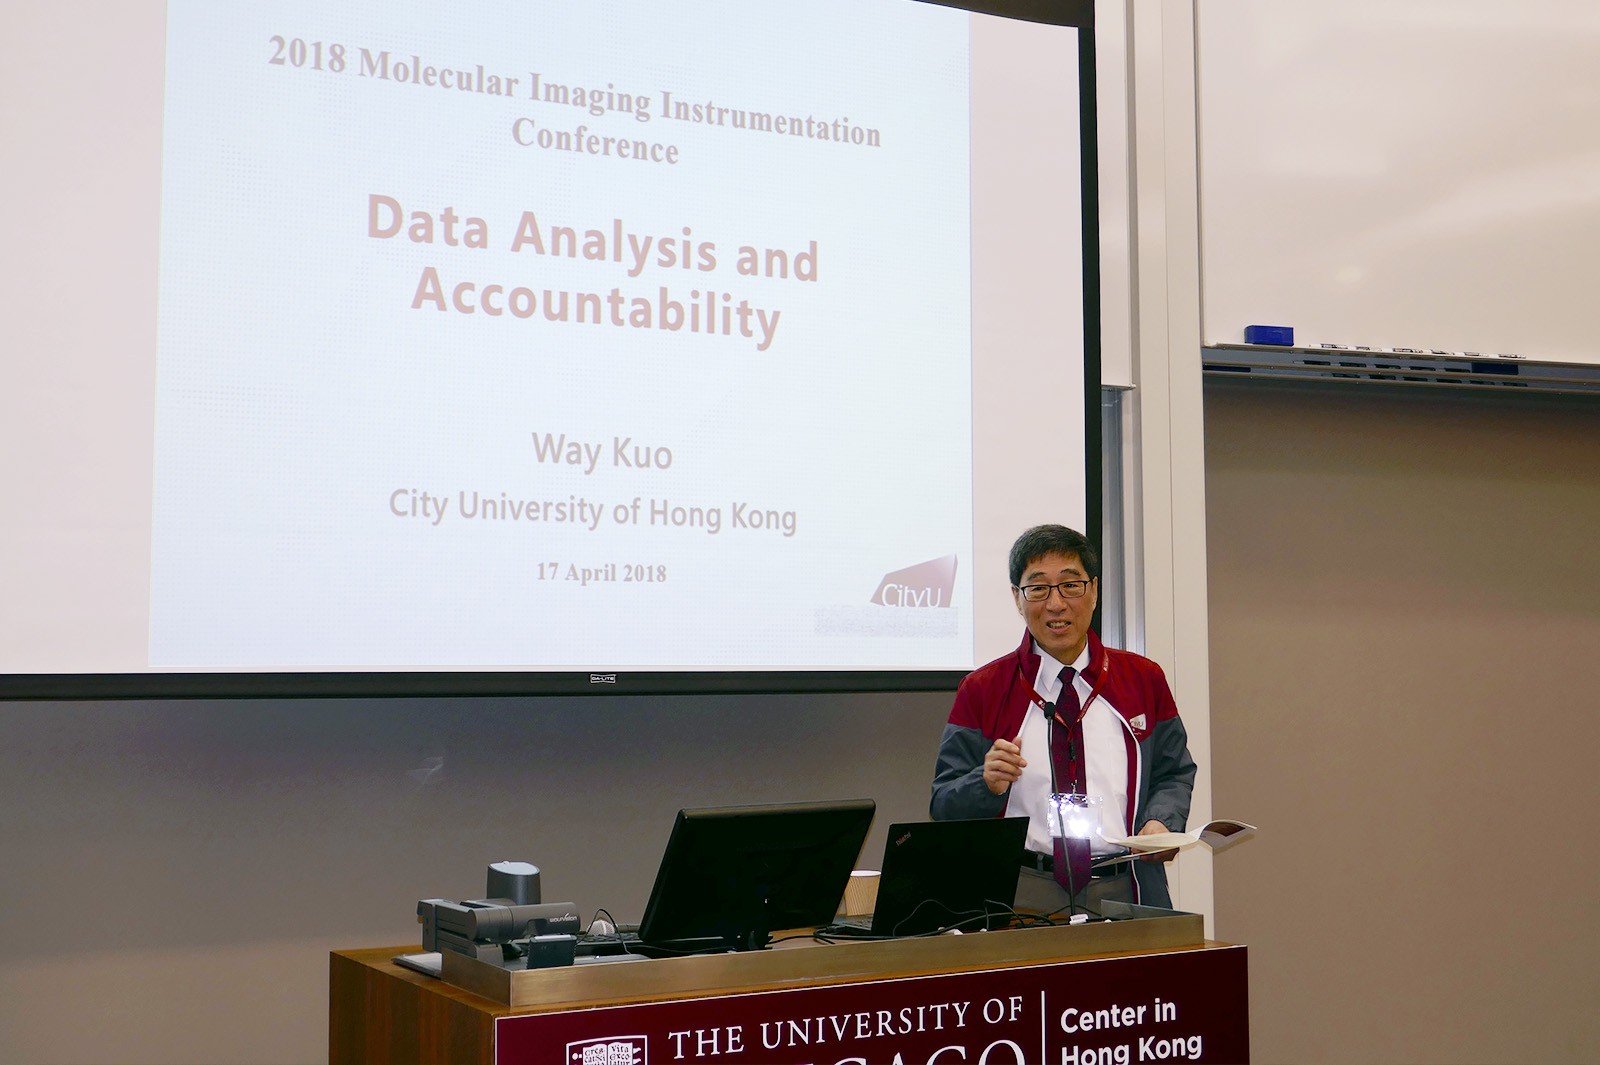 Professor Kuo delivers the keynote speech at the 2018 Molecular Imaging Instrumentation Conference.